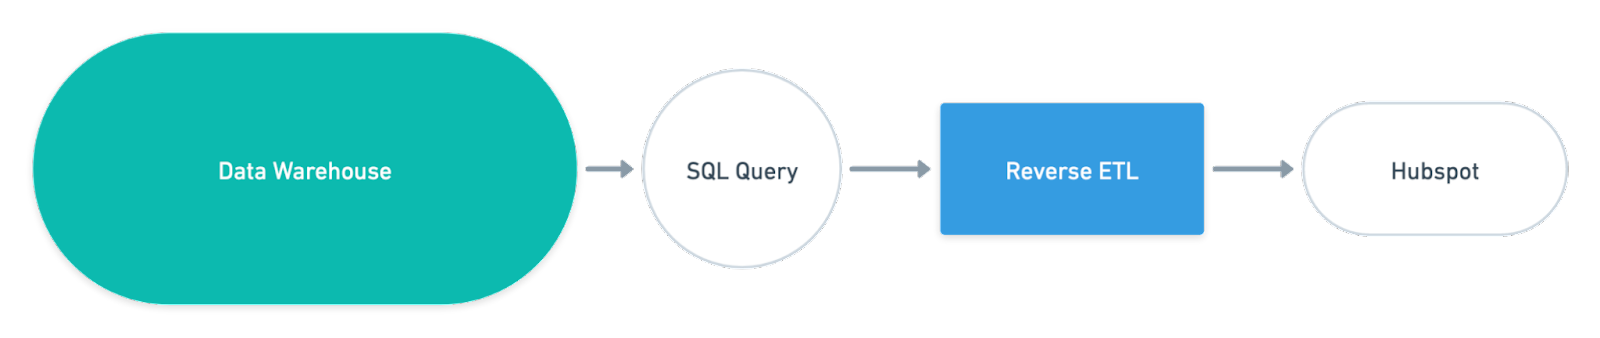 Unlike classic ETL, reverse ETL extracts data from your warehouse, transforms it so it plays nice with the target destination’s API (whether Salesforce, HubSpot, Marketo, Zendesk, or others), and loads it into the desired target app. 🎯